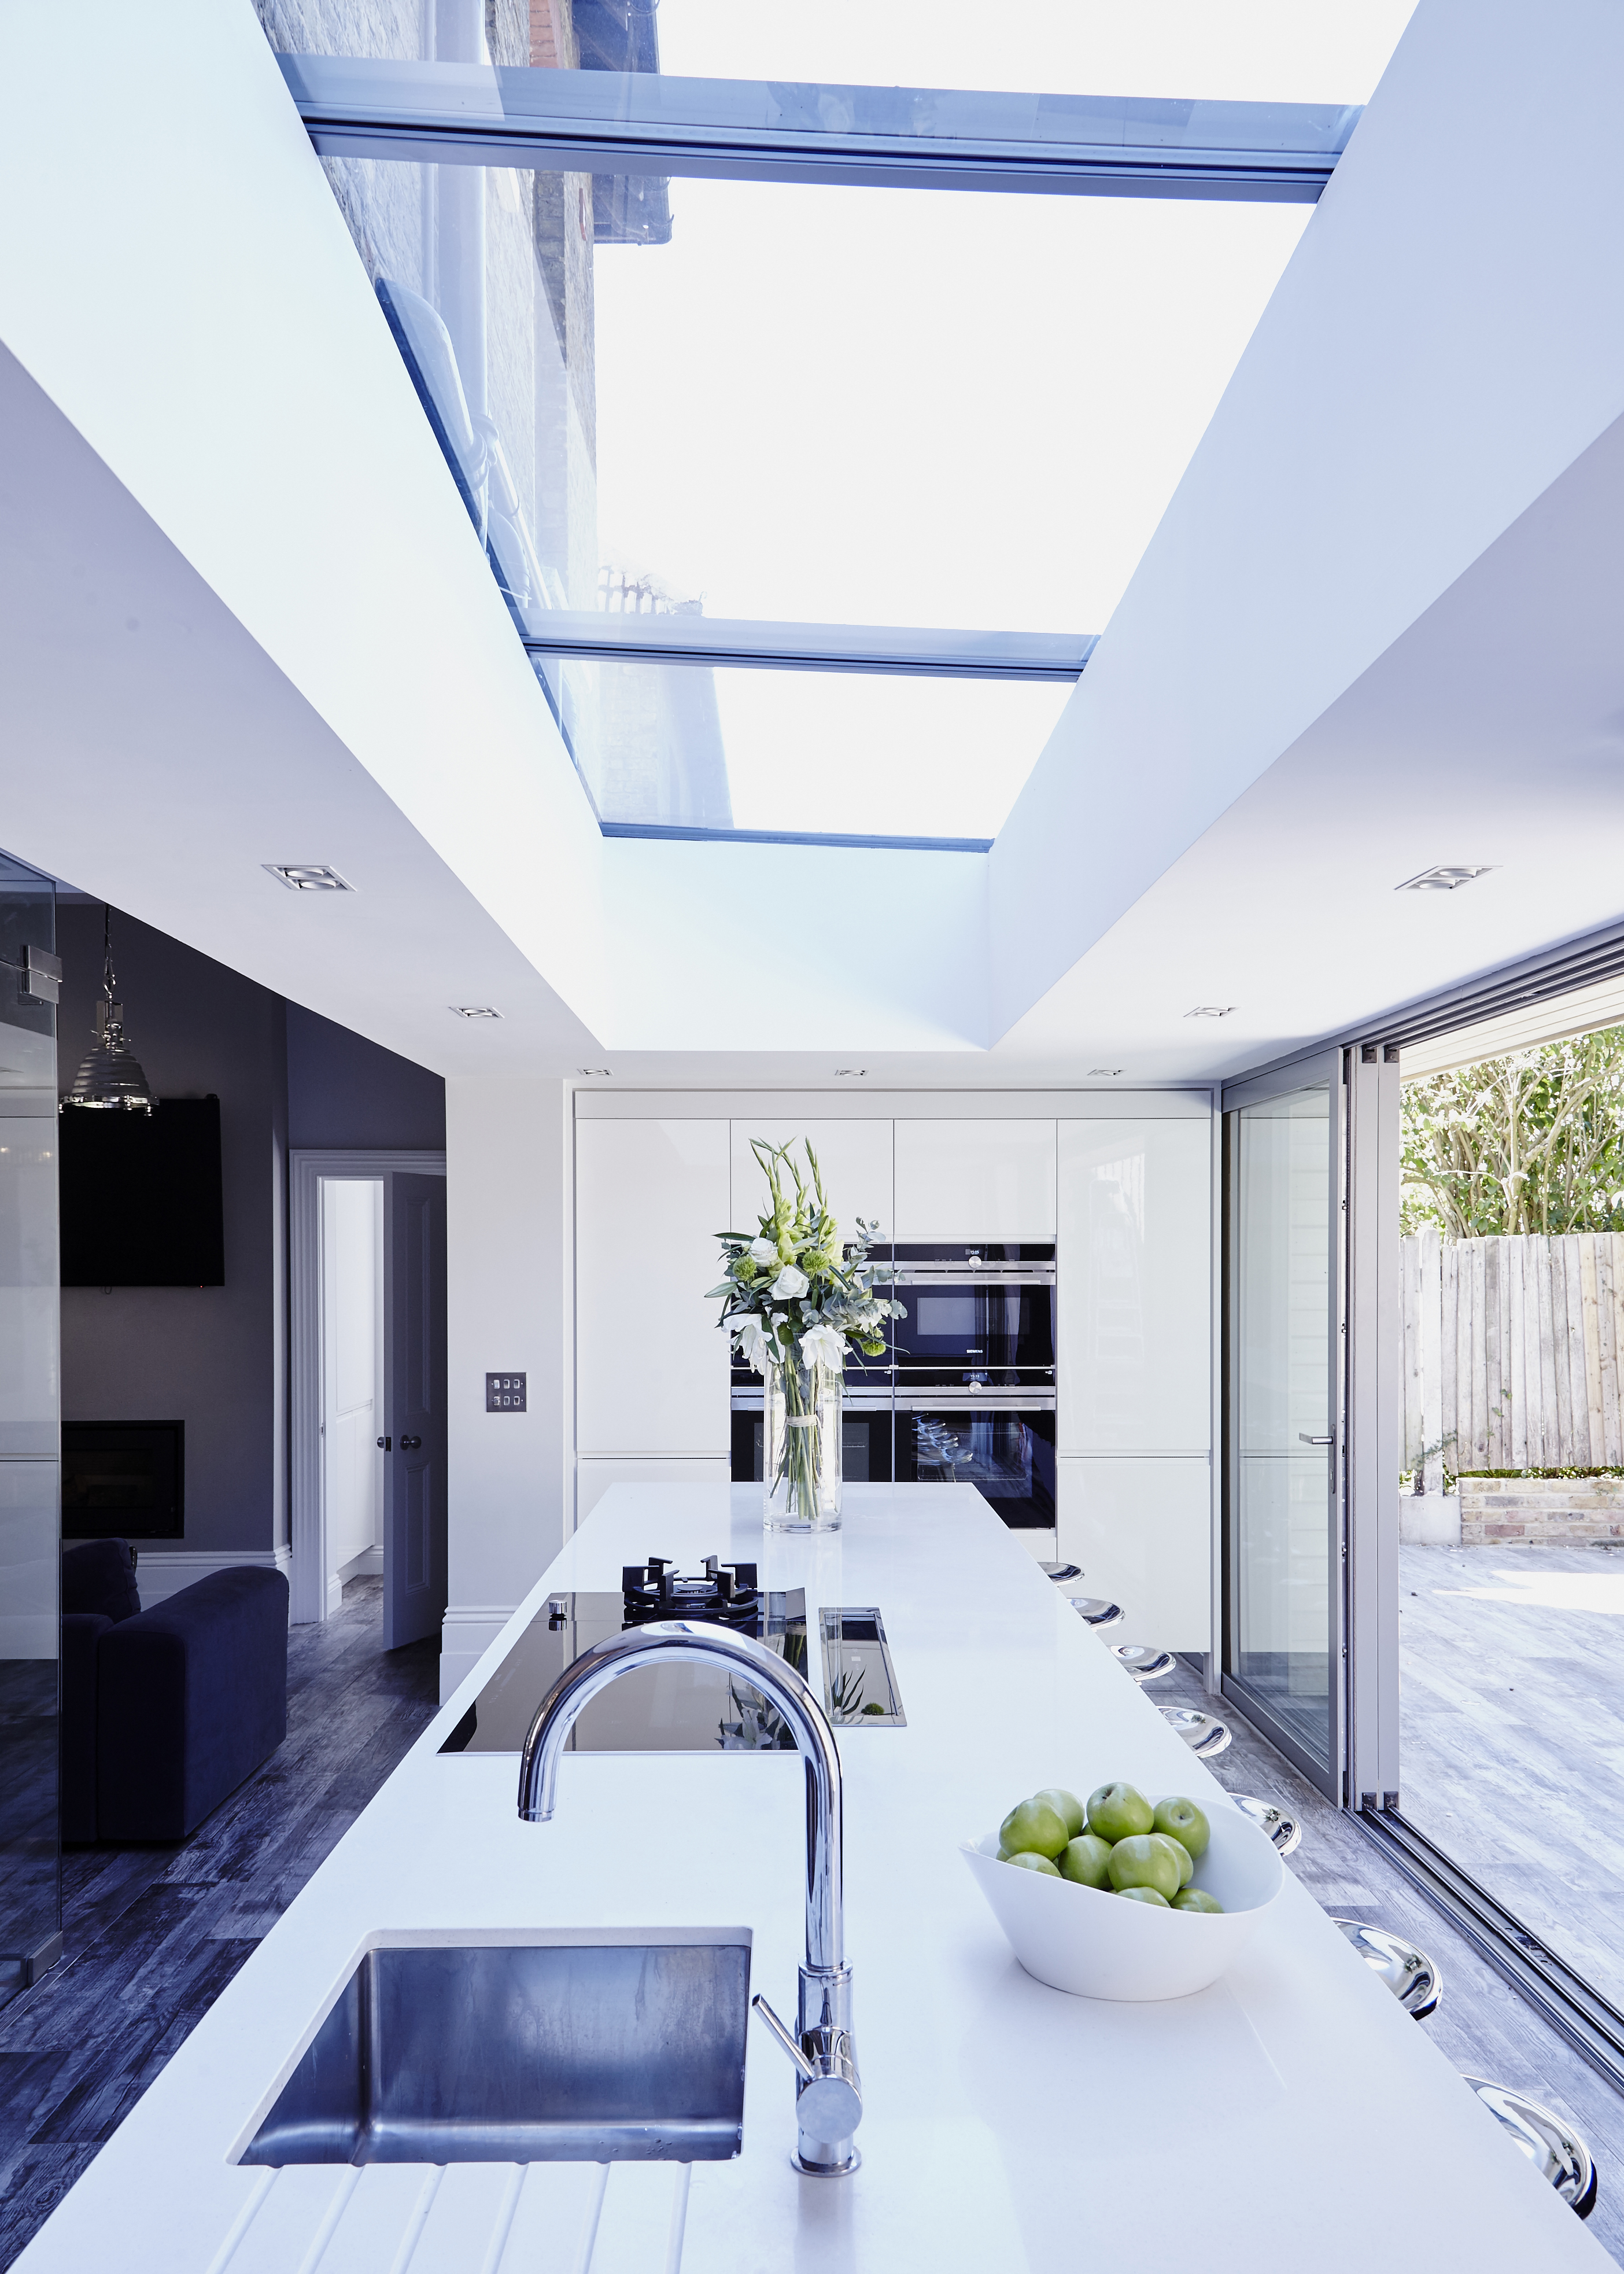 </p> <p>Find your ideal home design pro on designfor-me.com - get matched and see who's interested in your home project. Click image to see more inspiration from our design pros</p> <p>Design by Vicky, architect from Lambeth, London</p> <p>#architecture #homedesign #modernhomes #homeinspiration #kitchens #kitchendesign #kitcheninspiration #kitchenideas #kitchengoals #extensions #extensiondesign #extensioninspiration #extensionideas #houseextension #skylights #rooflights </p> <p>